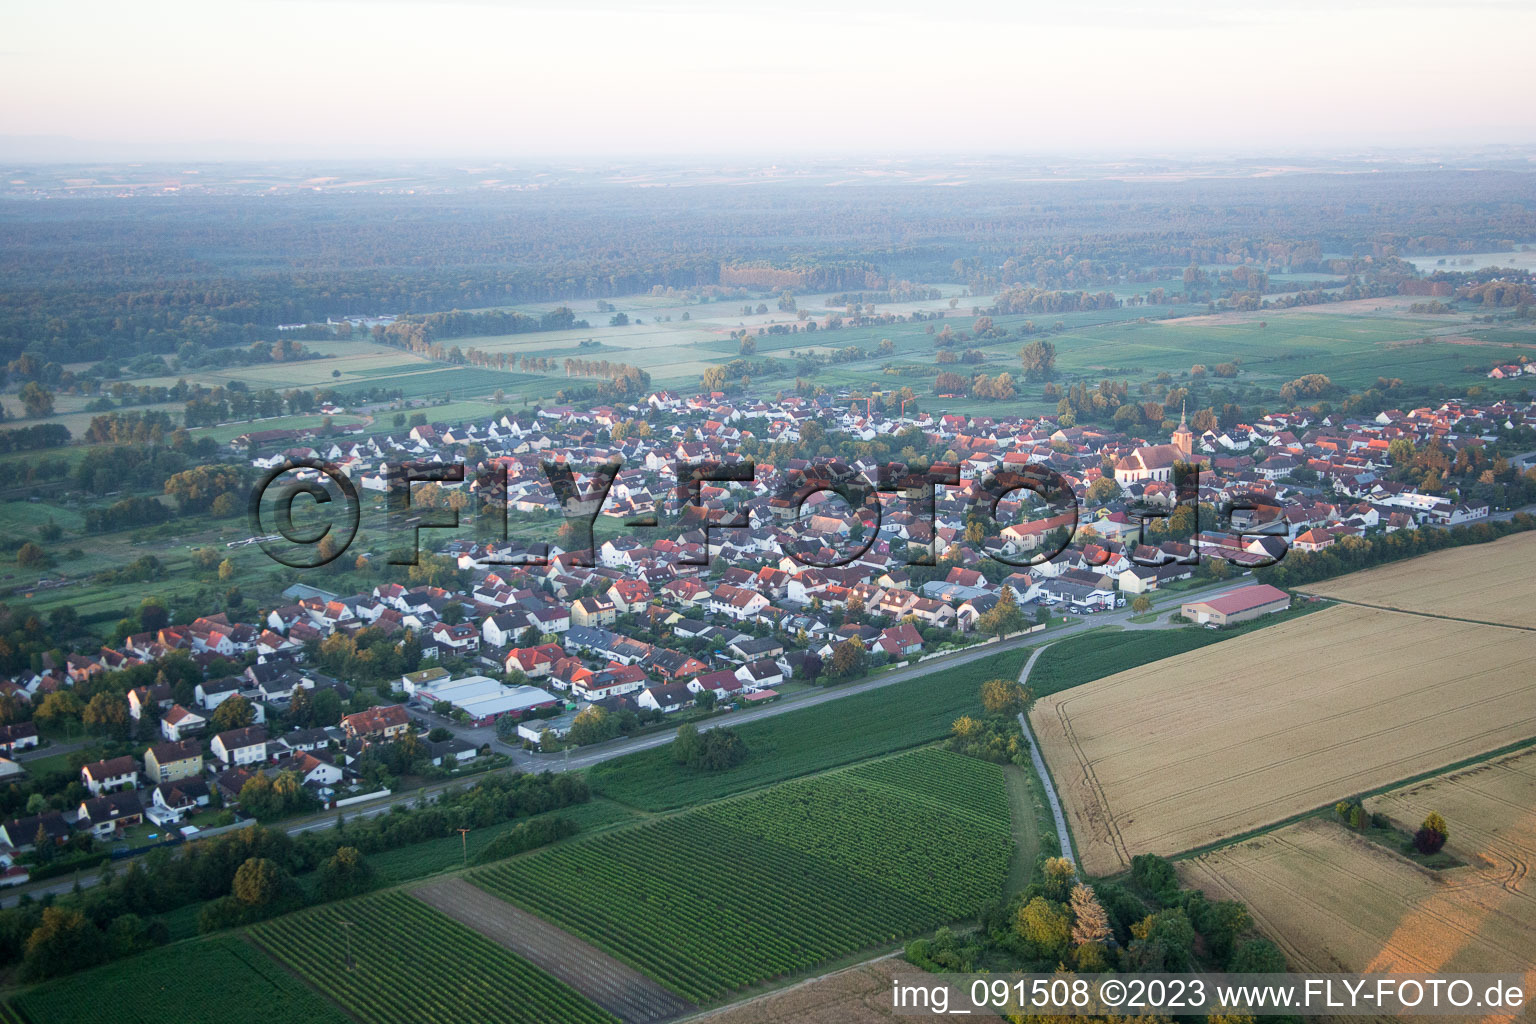 Steinfeld in the state Rhineland-Palatinate, Germany from the drone perspective